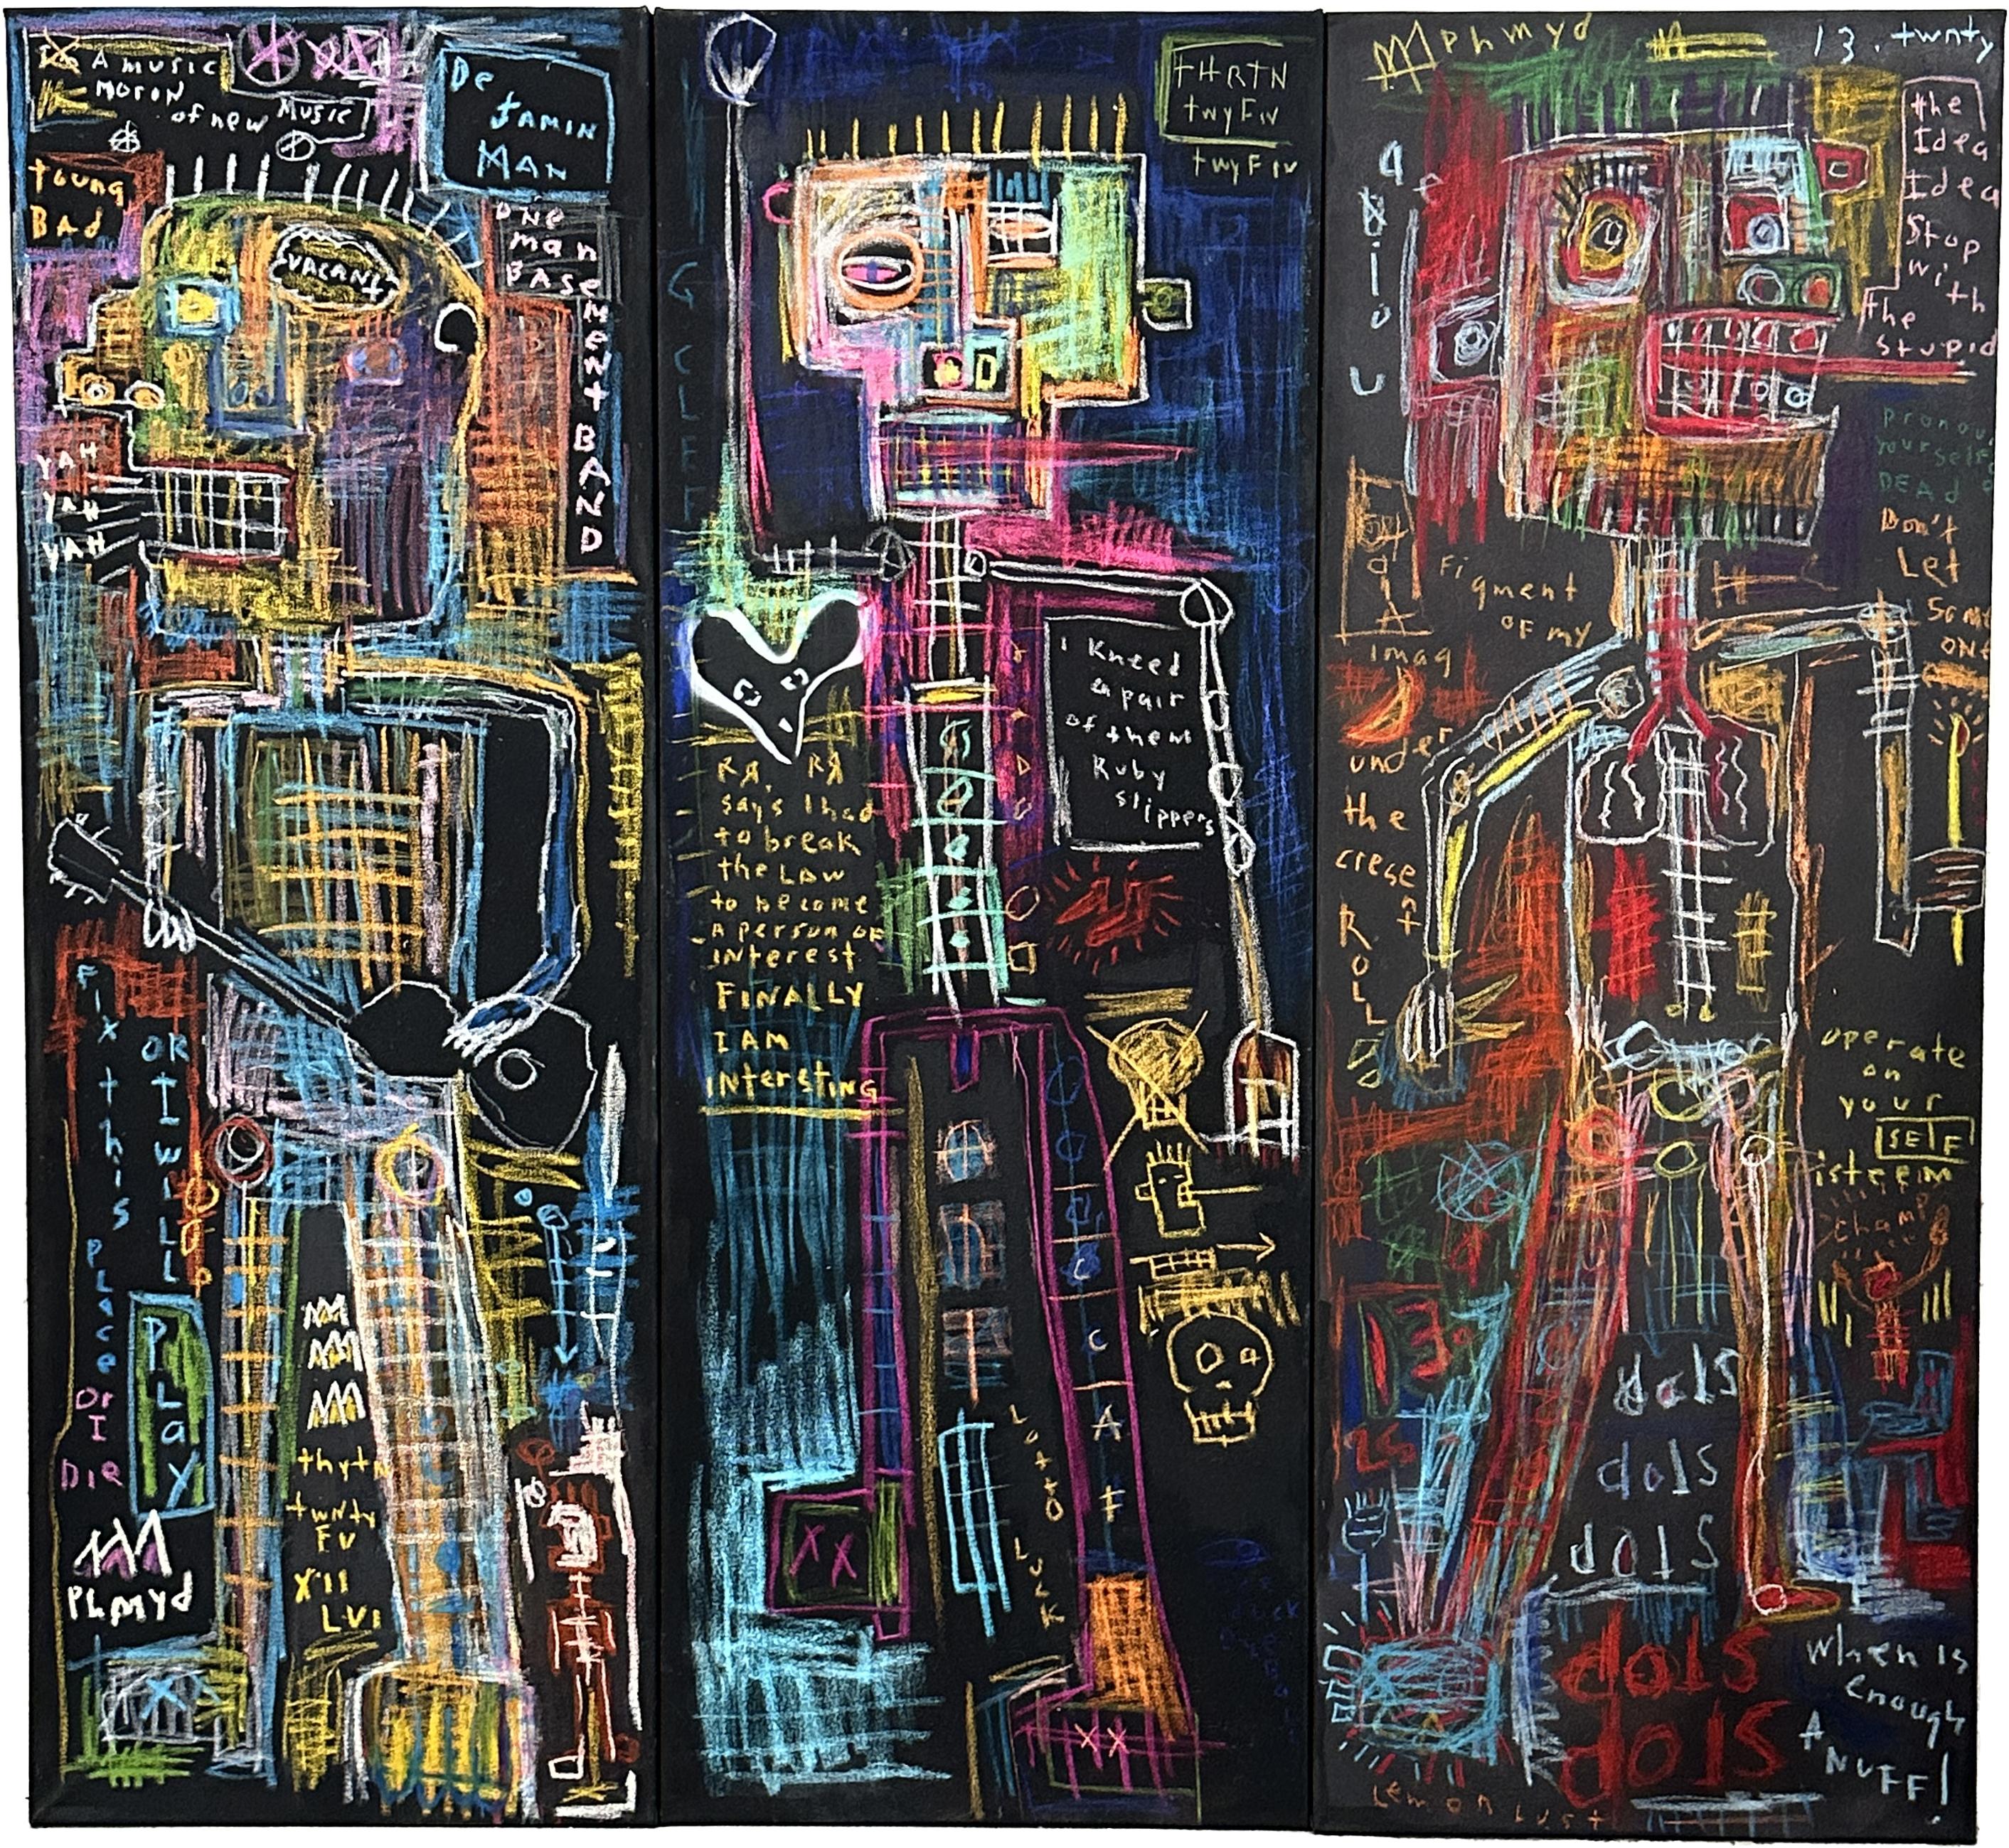 Jim Stella
Triptych
2017 Mixed Media
Oil, Acrylic, Oil Stick and Collage

48 x 72 in

 24" x 48" in  each panel 

Jim Stella was born in Detroit in 1954 and was attracted to art from an early age. He attended University of Detroit Jesuit high school